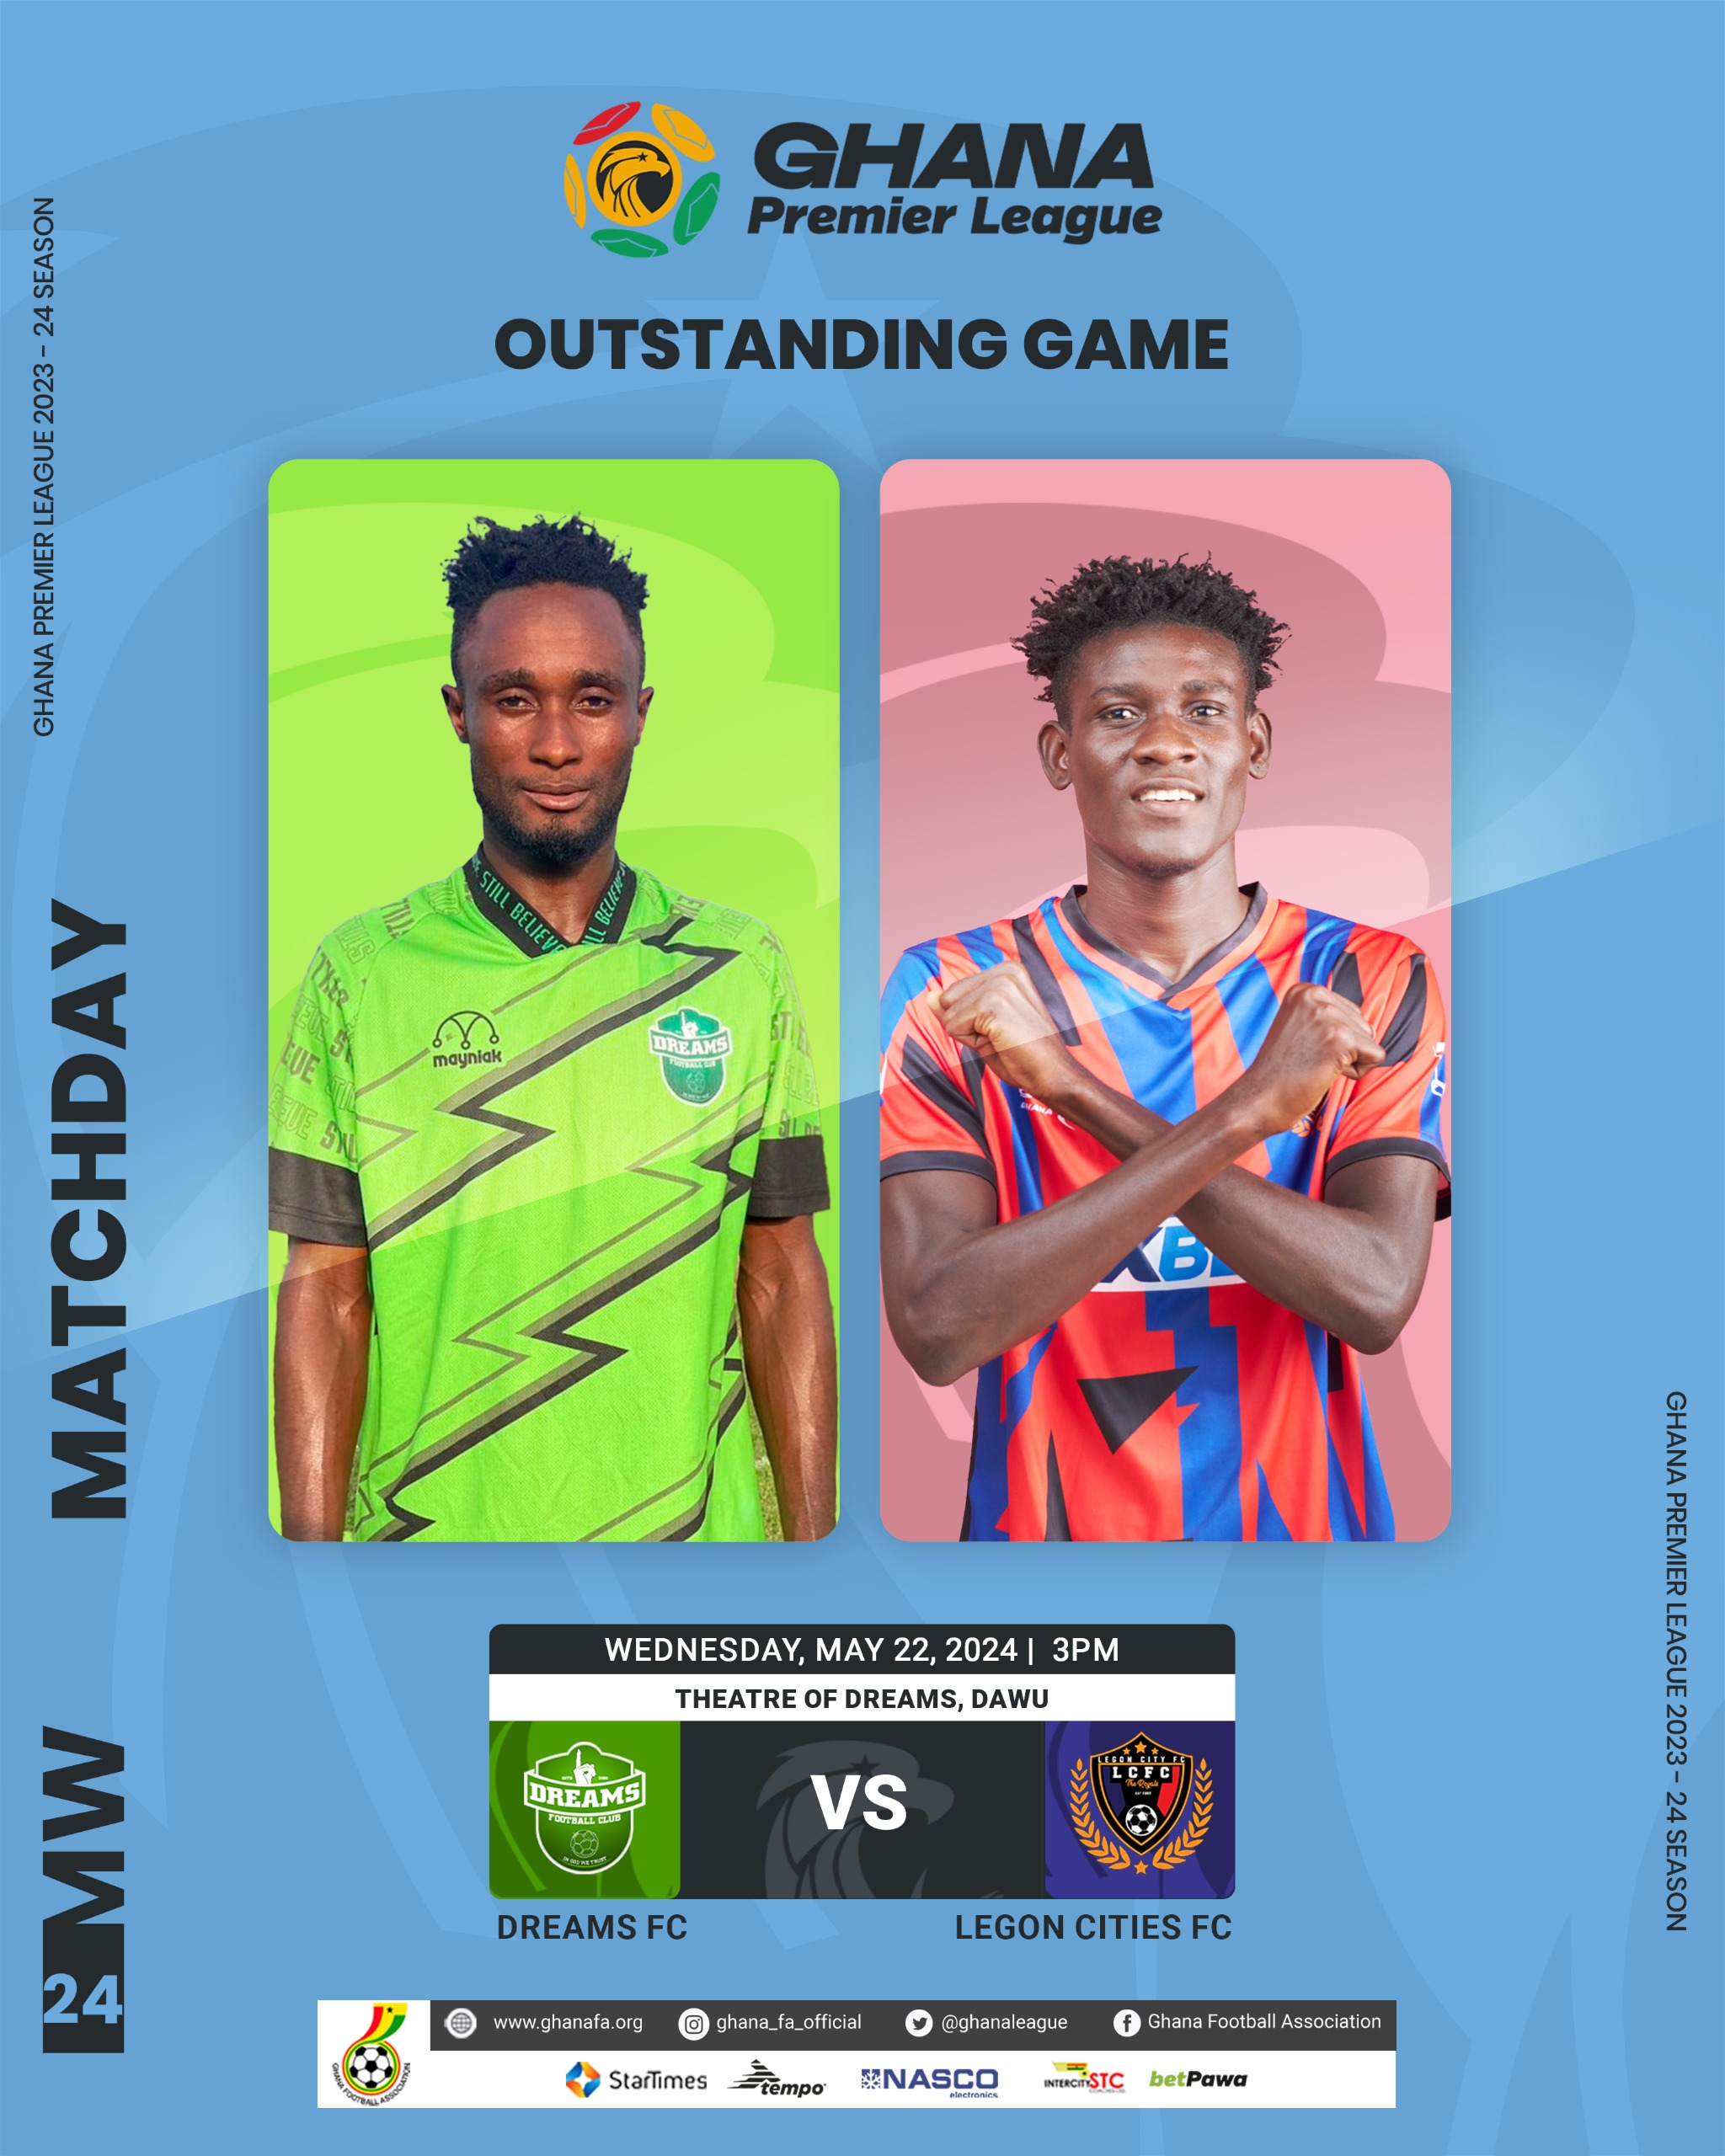 Dreams FC take on Legon Cities in an outstanding Premier League match on Wednesday